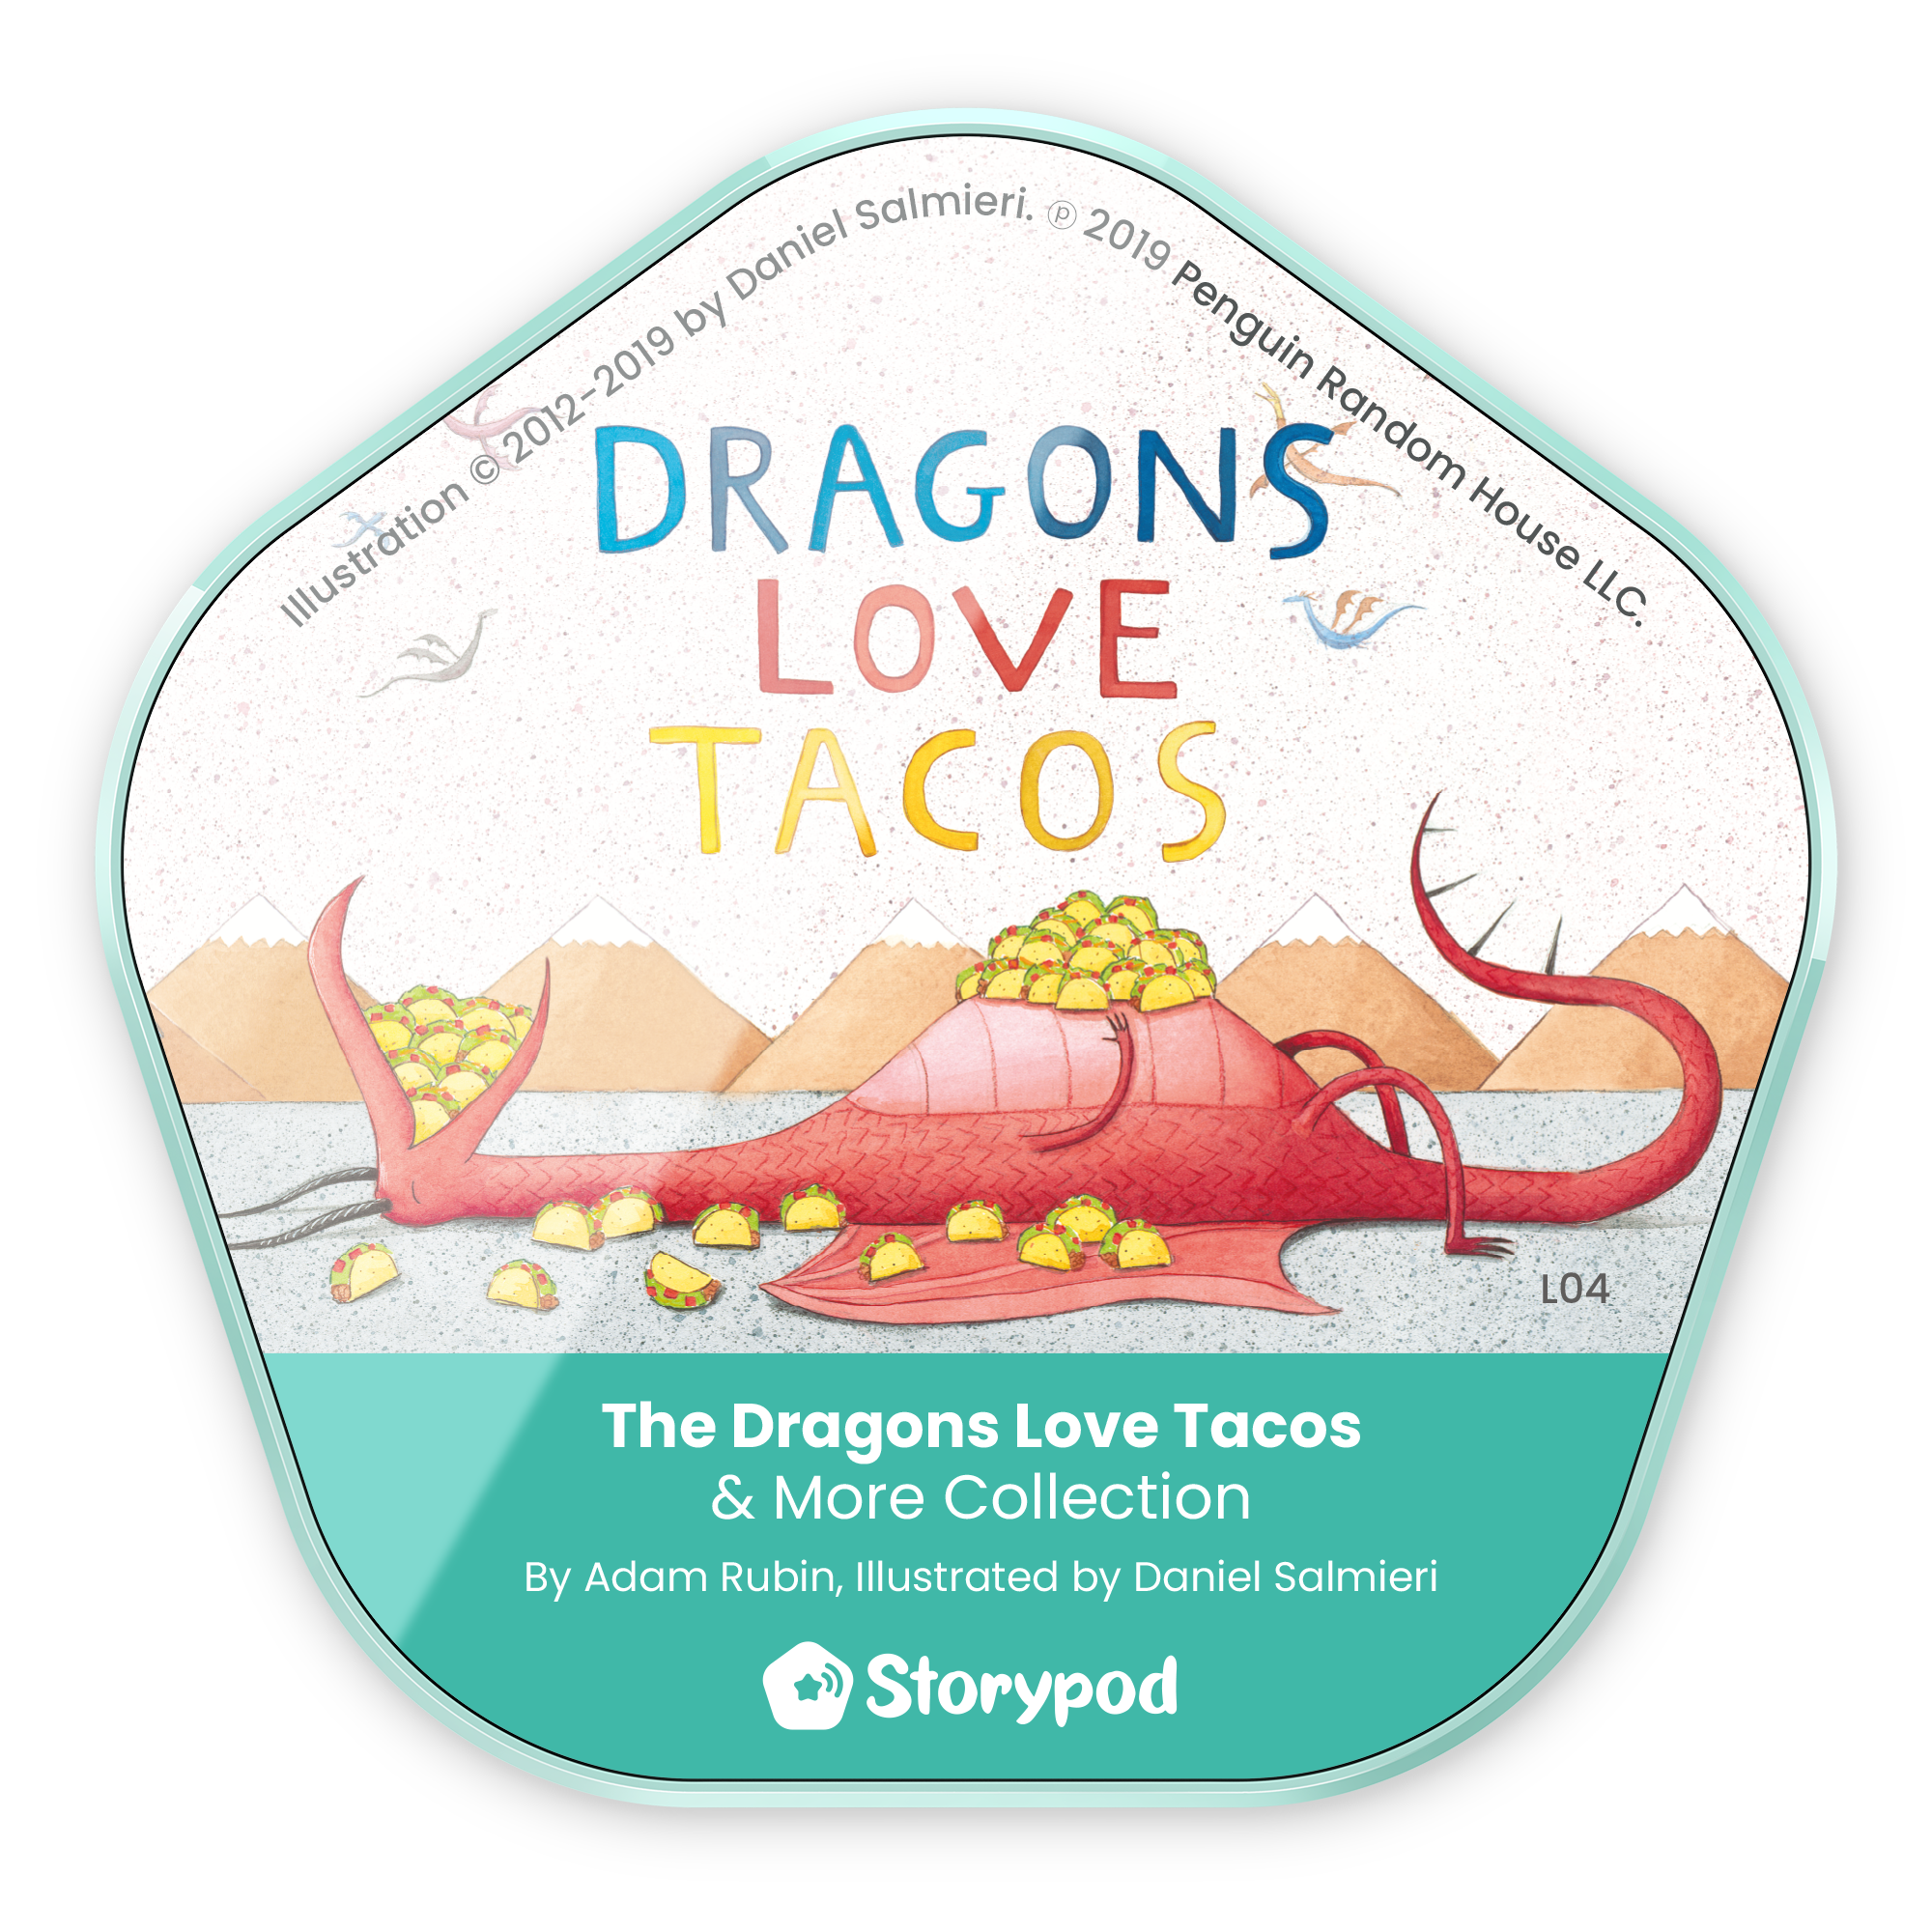 The Dragons Love Tacos & More Collection